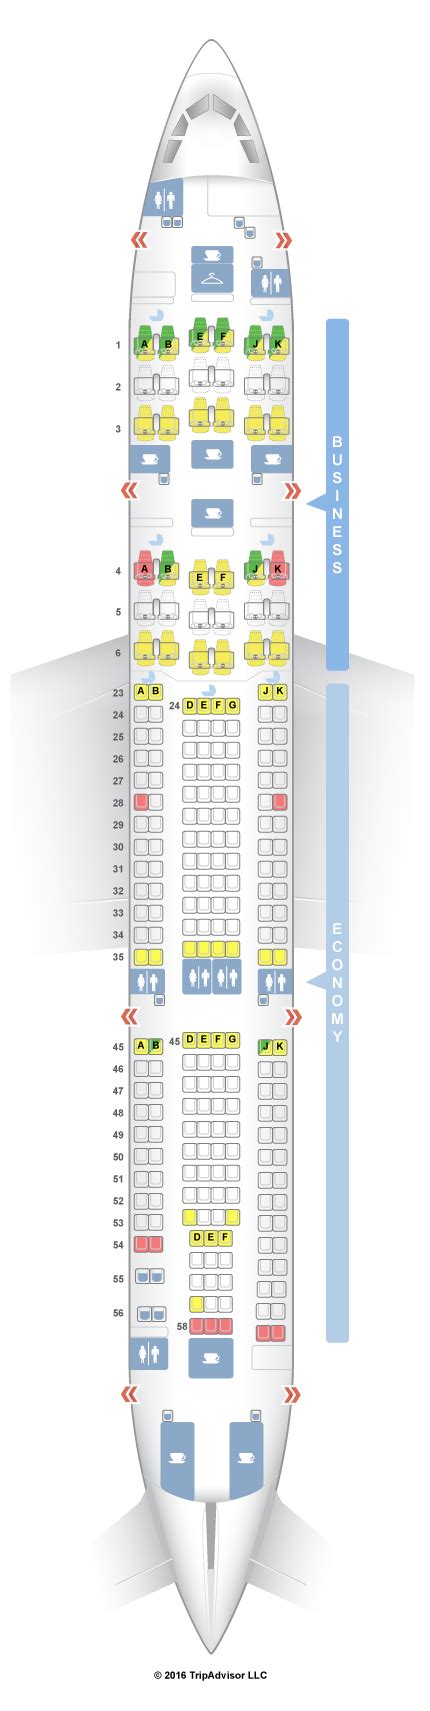 Airbus A330 200 Seating Plan Qantas Elcho Table Hot Sex Picture